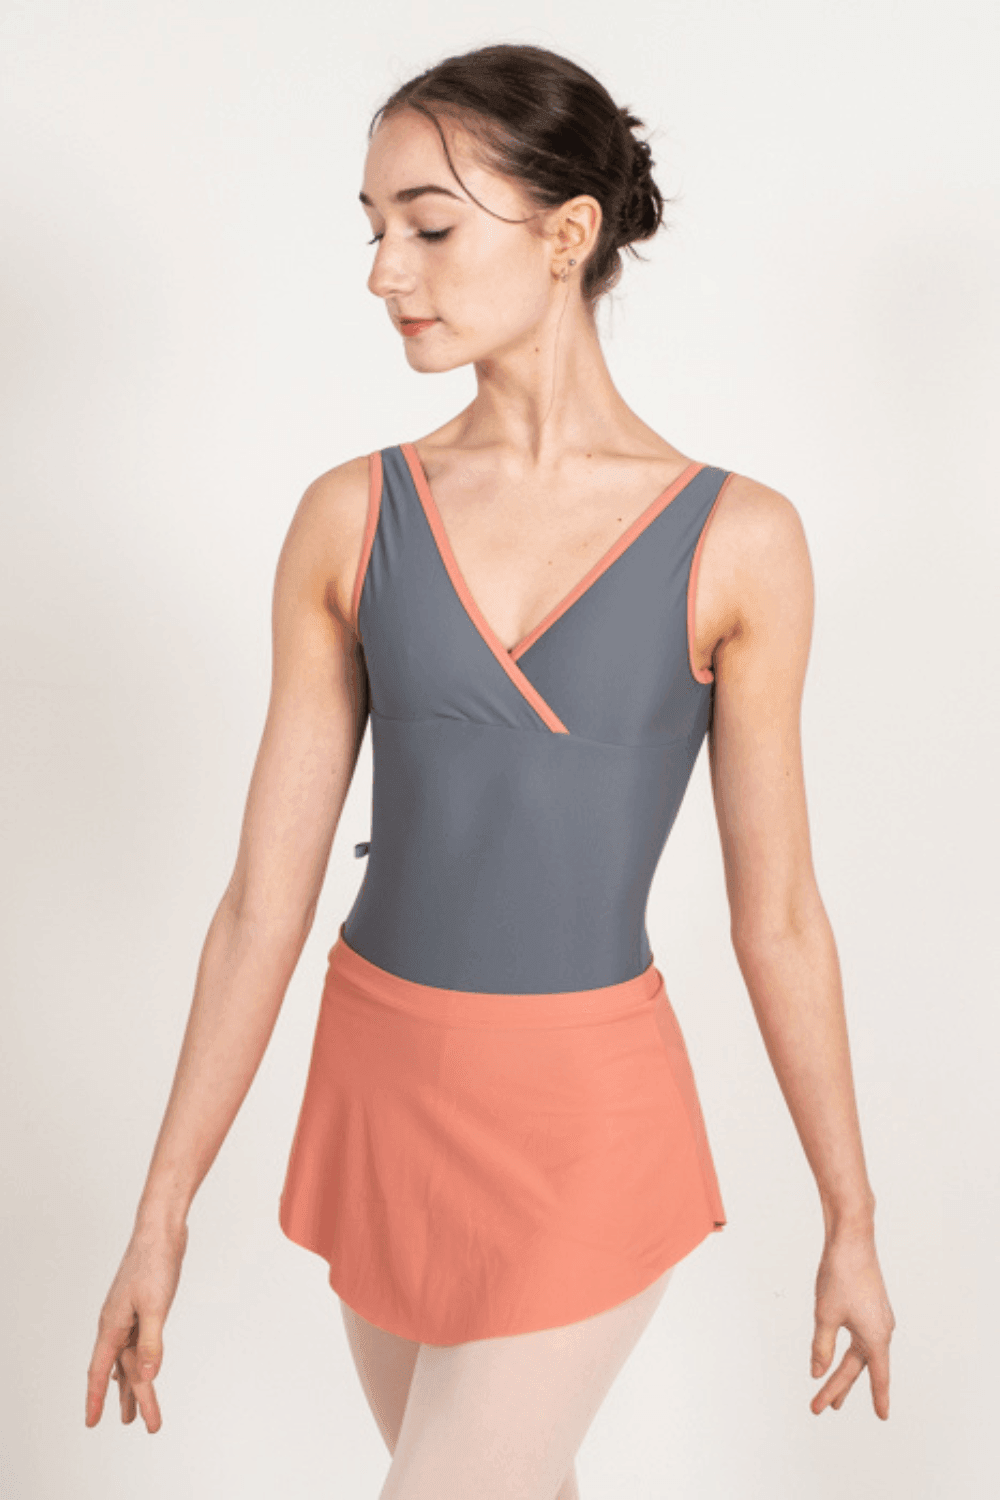 MARSEILLE LEOTARD - Made to Order - Imperfect Pointes